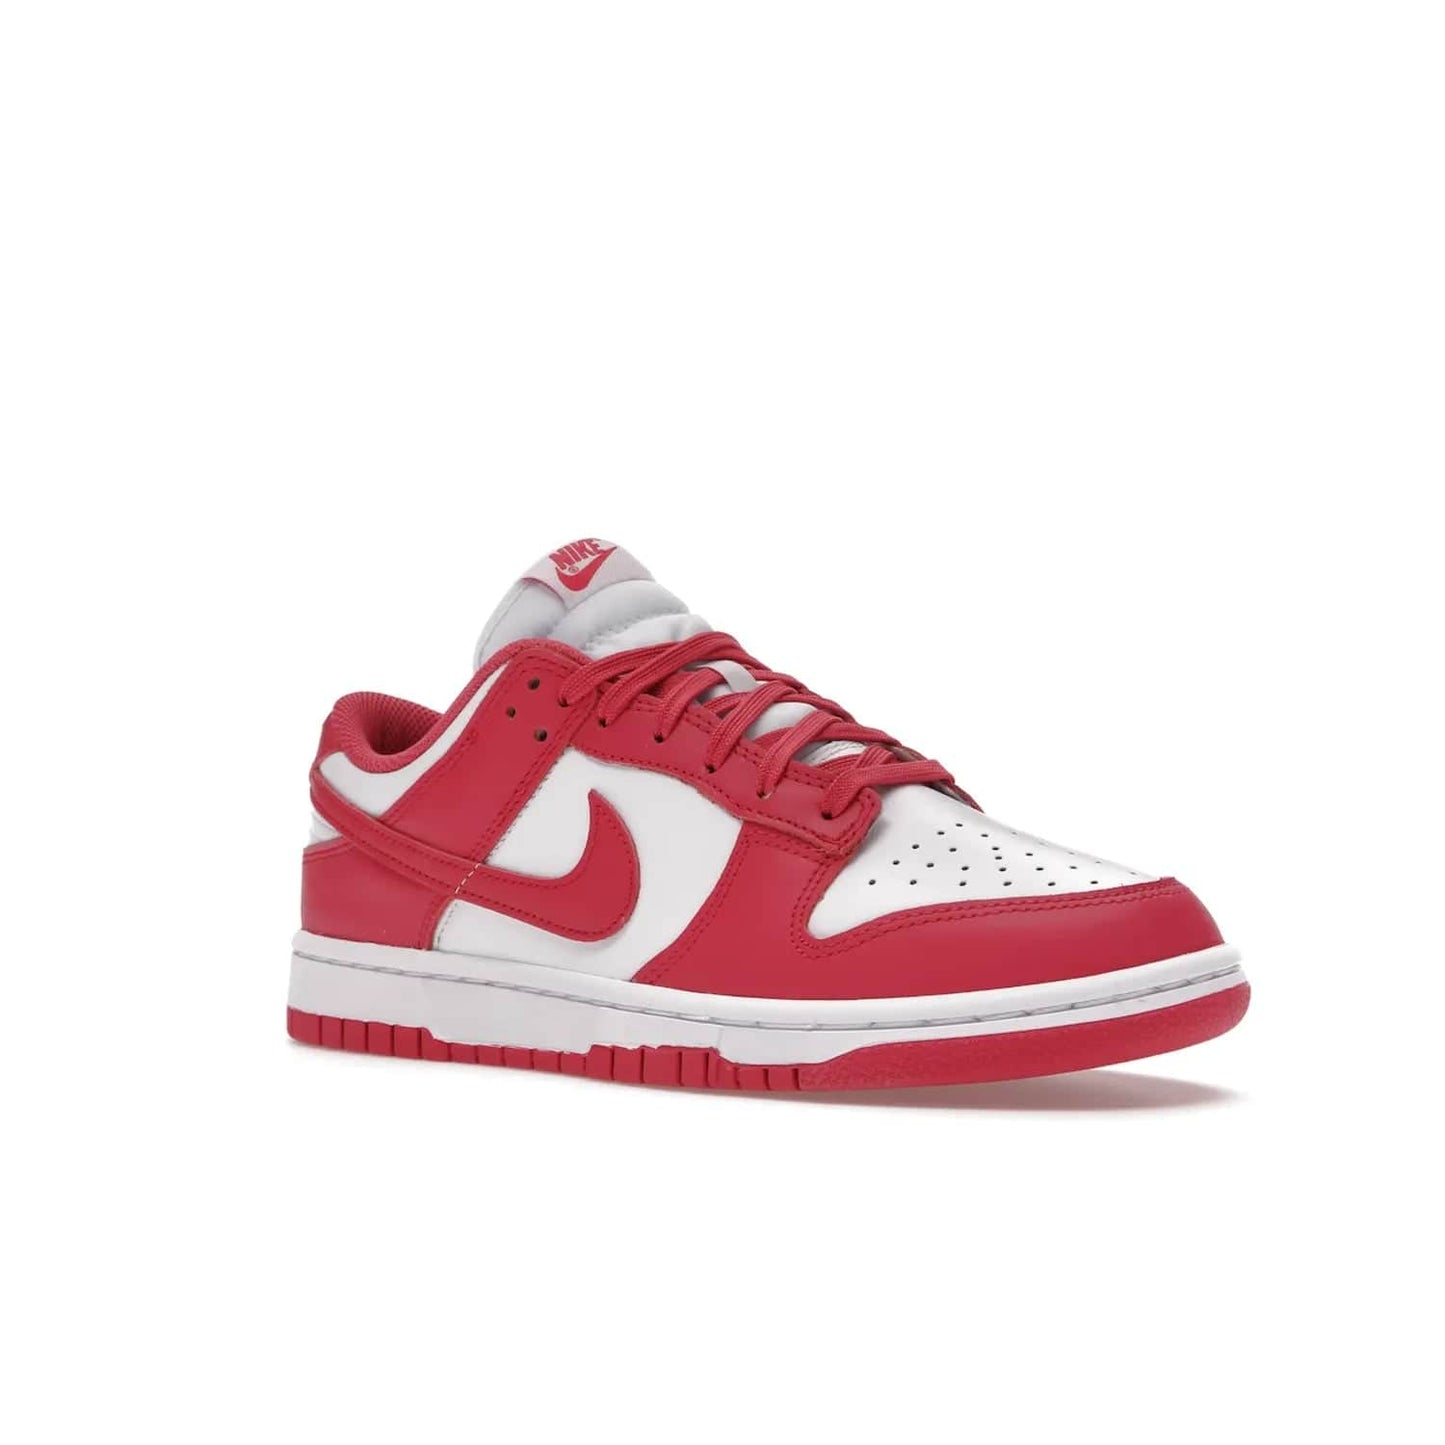 Nike Dunk Low Archeo Pink (Women's) - Image 5 - Only at www.BallersClubKickz.com - Introducing the stylish and comfortable Nike Dunk Low Archeo Pink (Women's). White/Archeo Pink colorway with white leather upper, pink overlays and Swooshes. Get yours now!